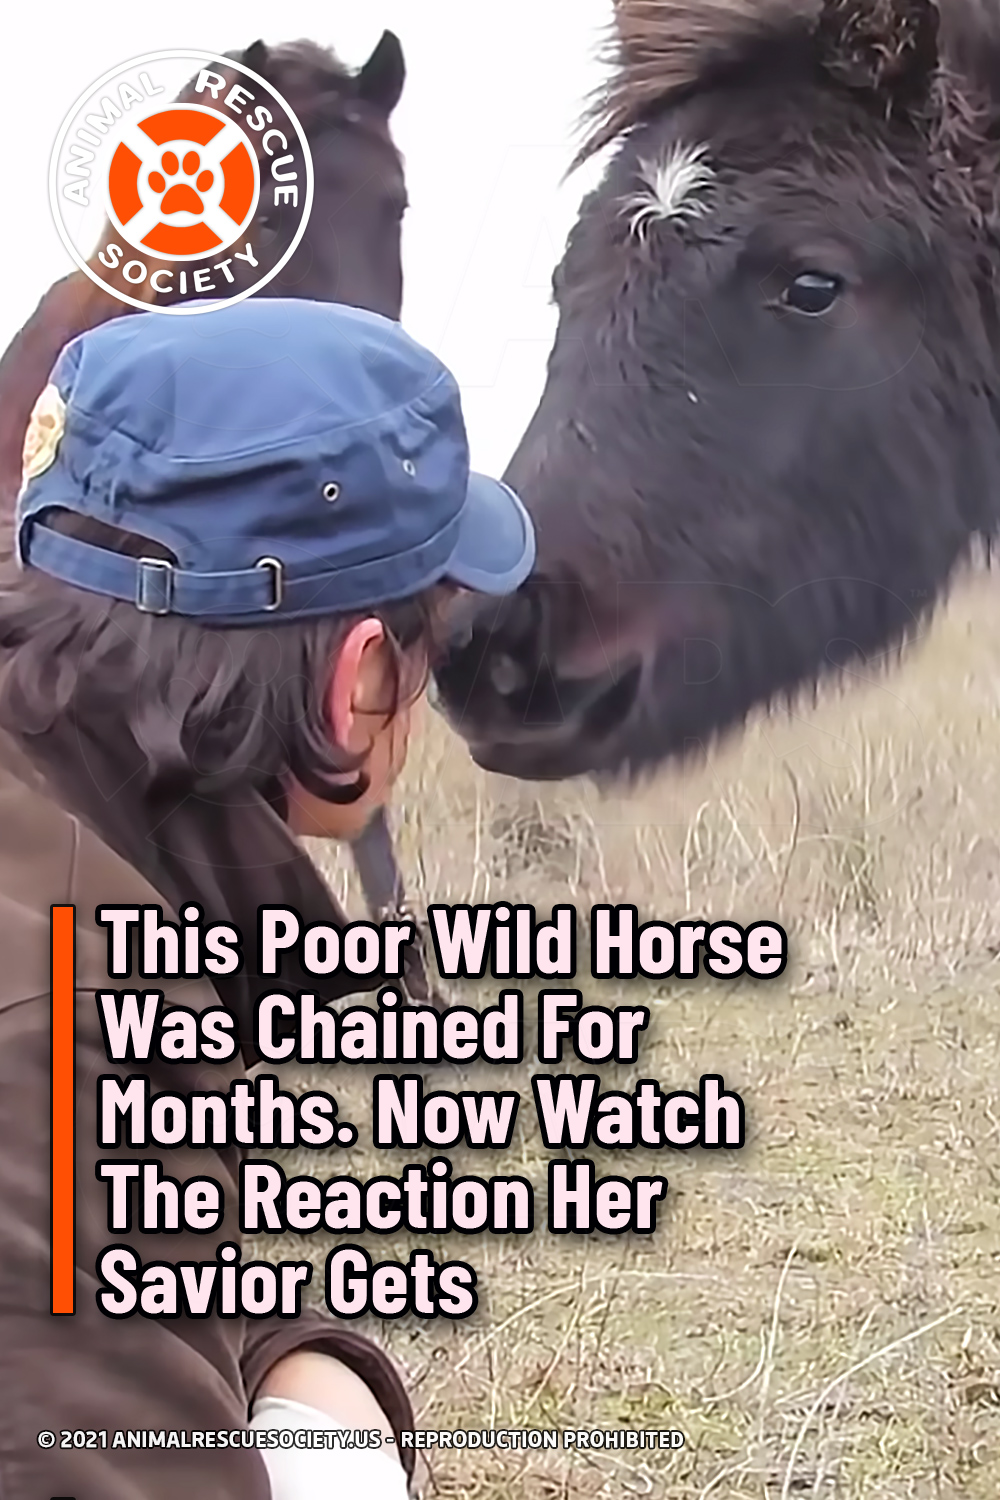 This Poor Wild Horse Was Chained For Months. Now Watch The Reaction Her Savior Gets